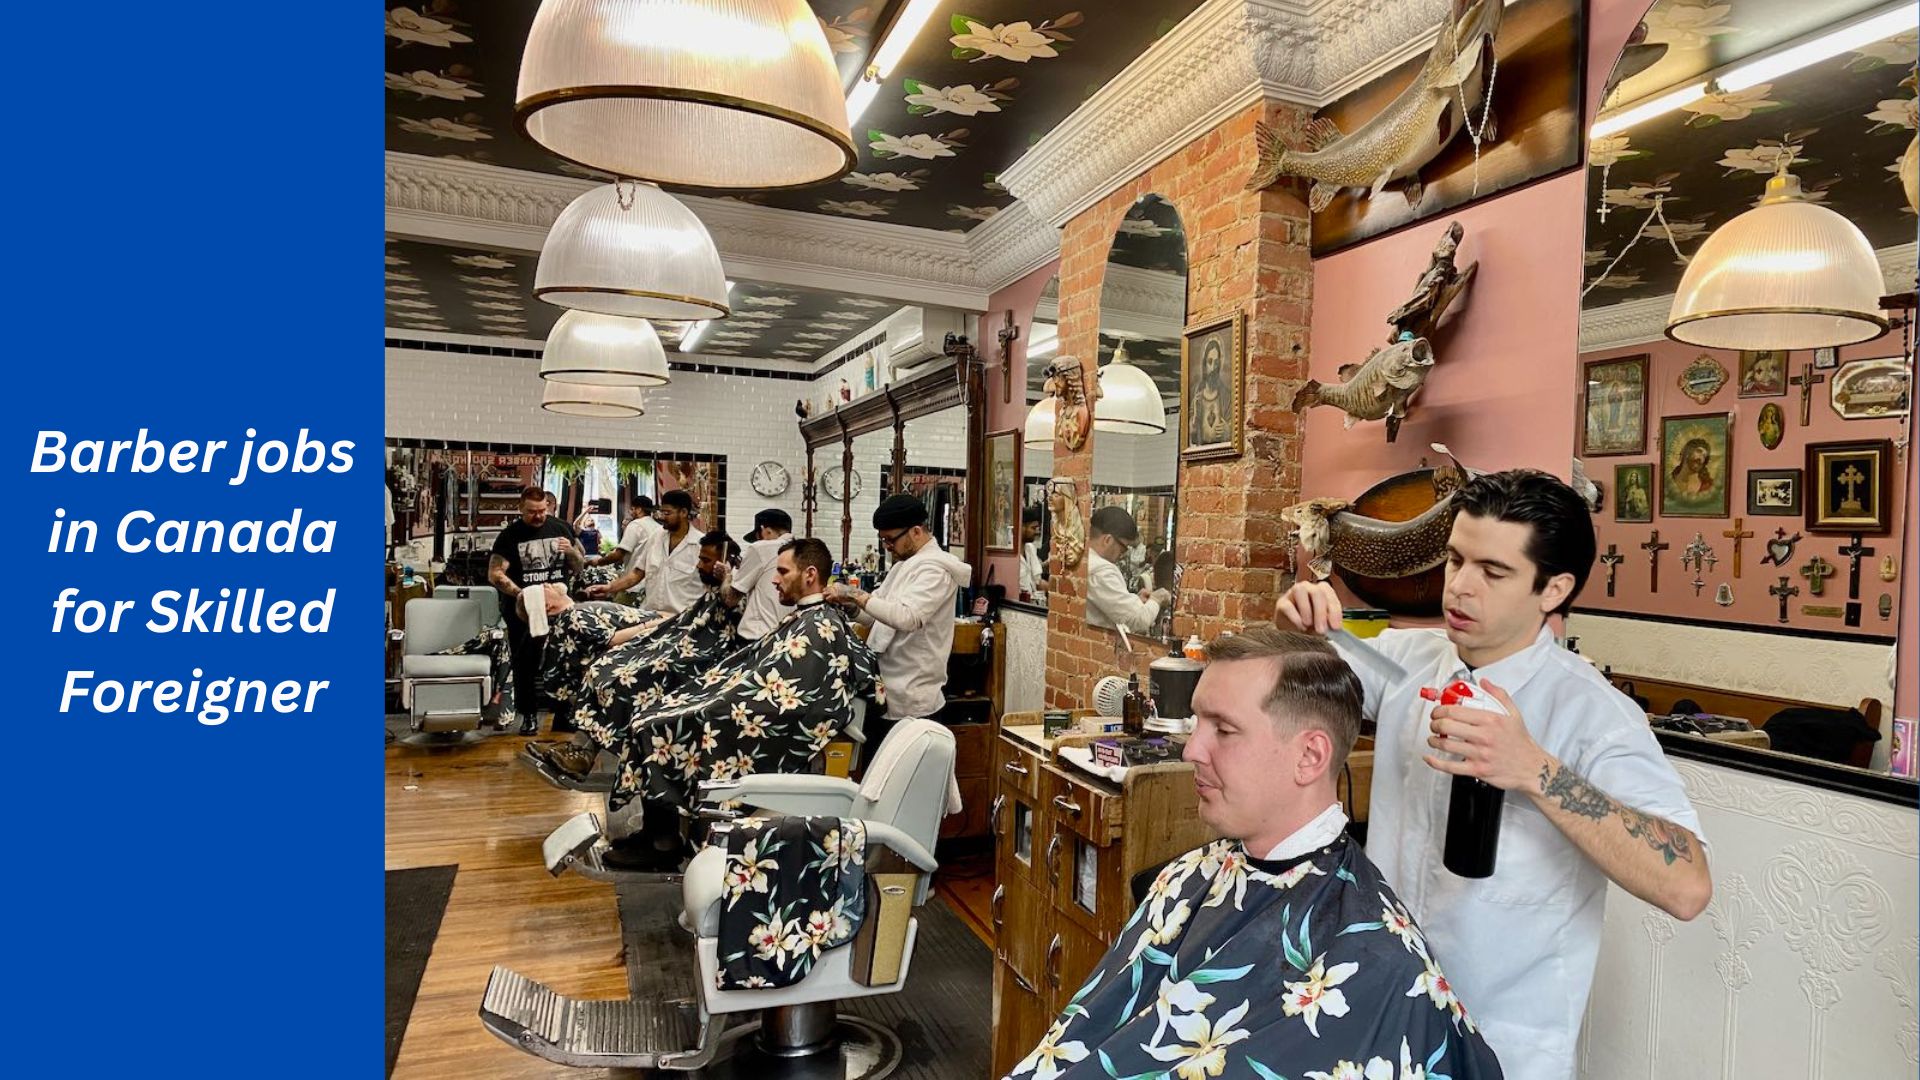 Apply for Barber Jobs in Canada for Skilled Foreigner | Salary: $20 - $60/Hour